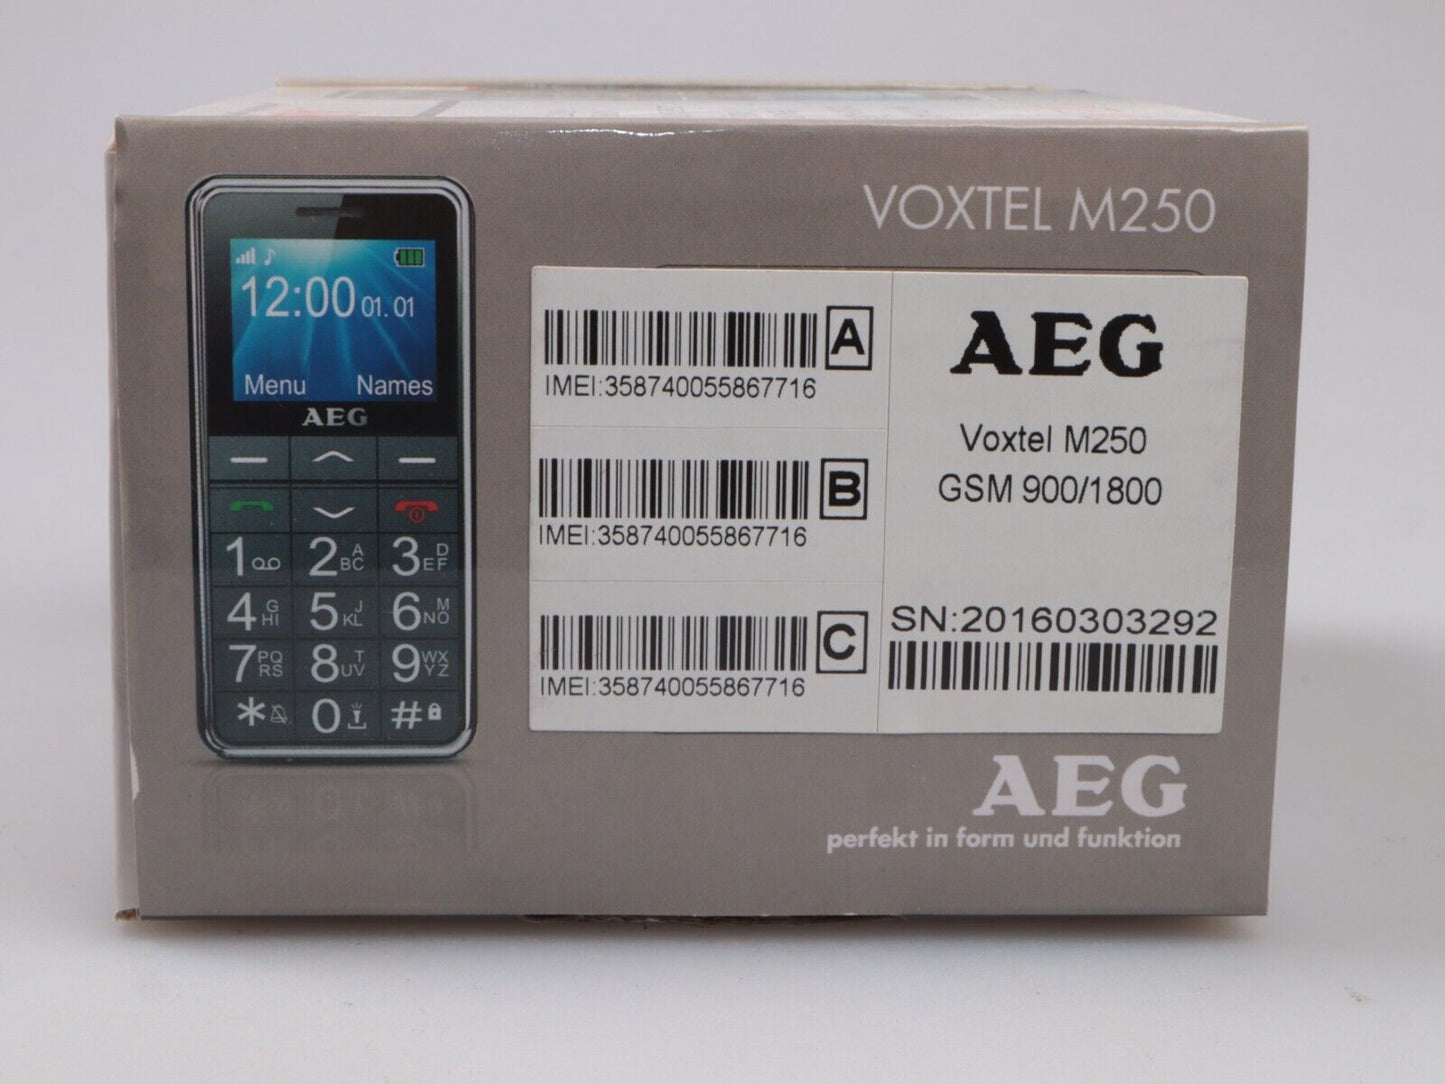 VOXTEL M250 | AEG | Big Button Mobile Phone | New In Open Box